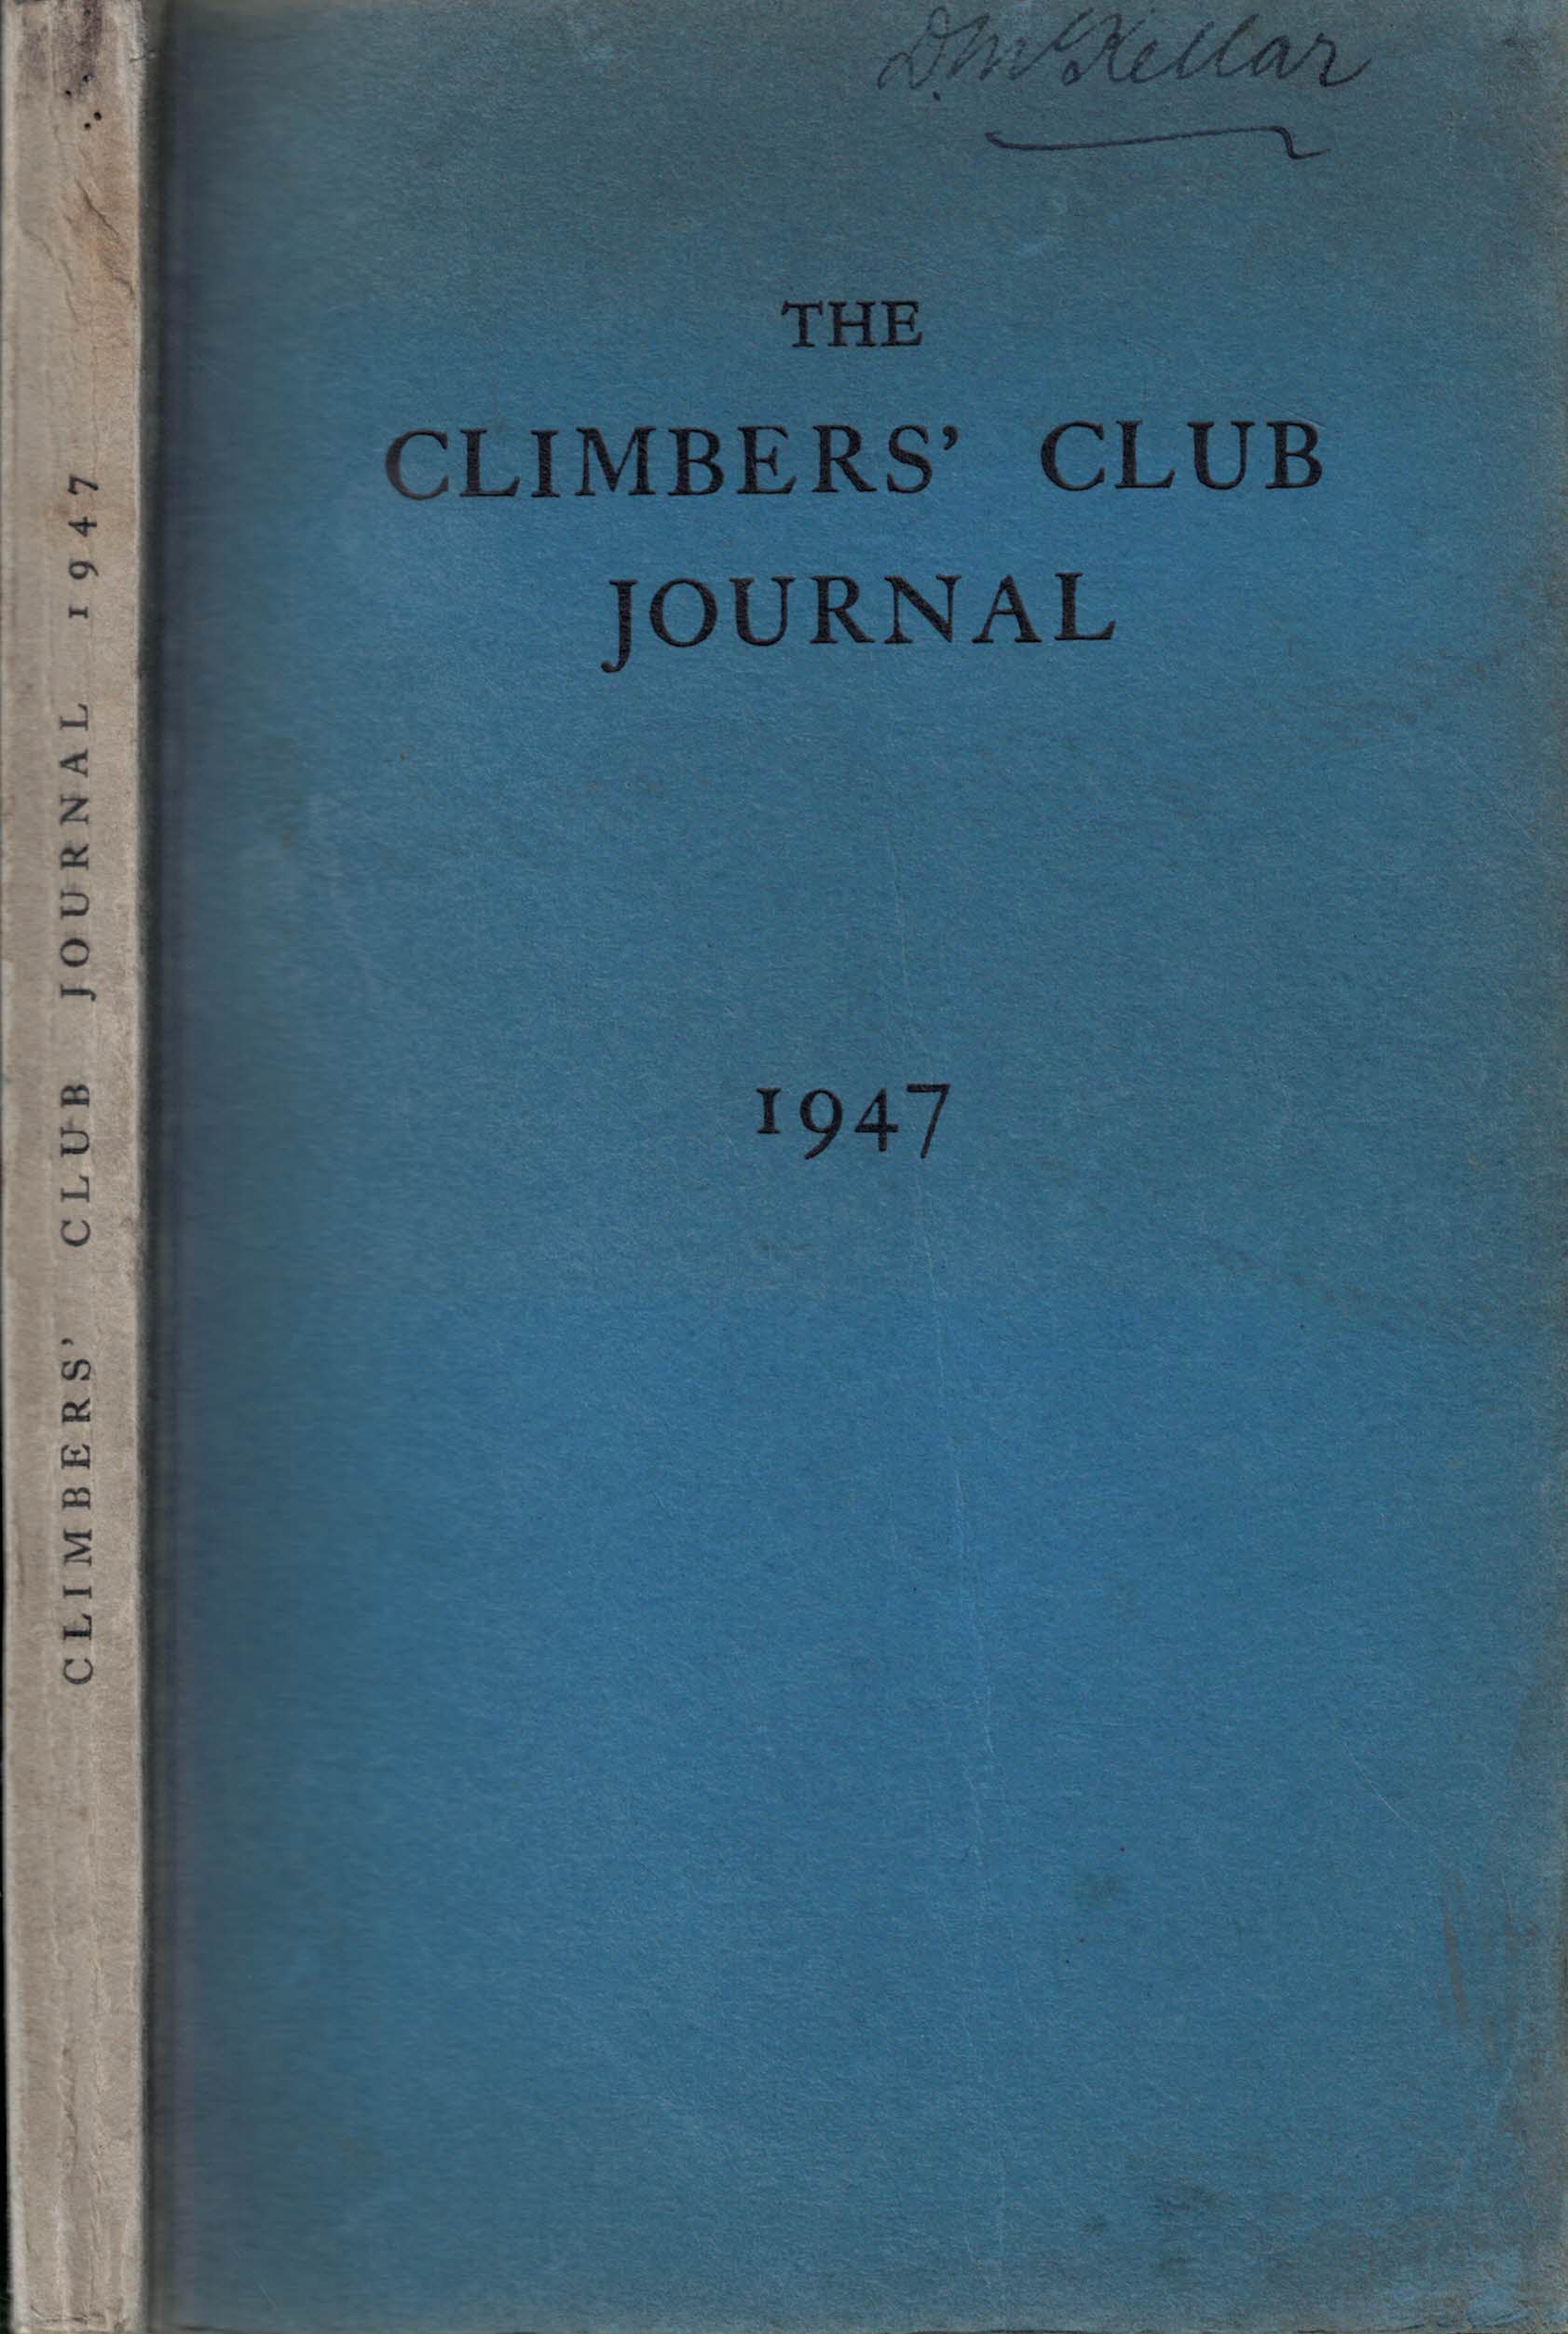 The Climbers' Club Journal. 1947. Vol. VIII. No. 2. Issue 72.